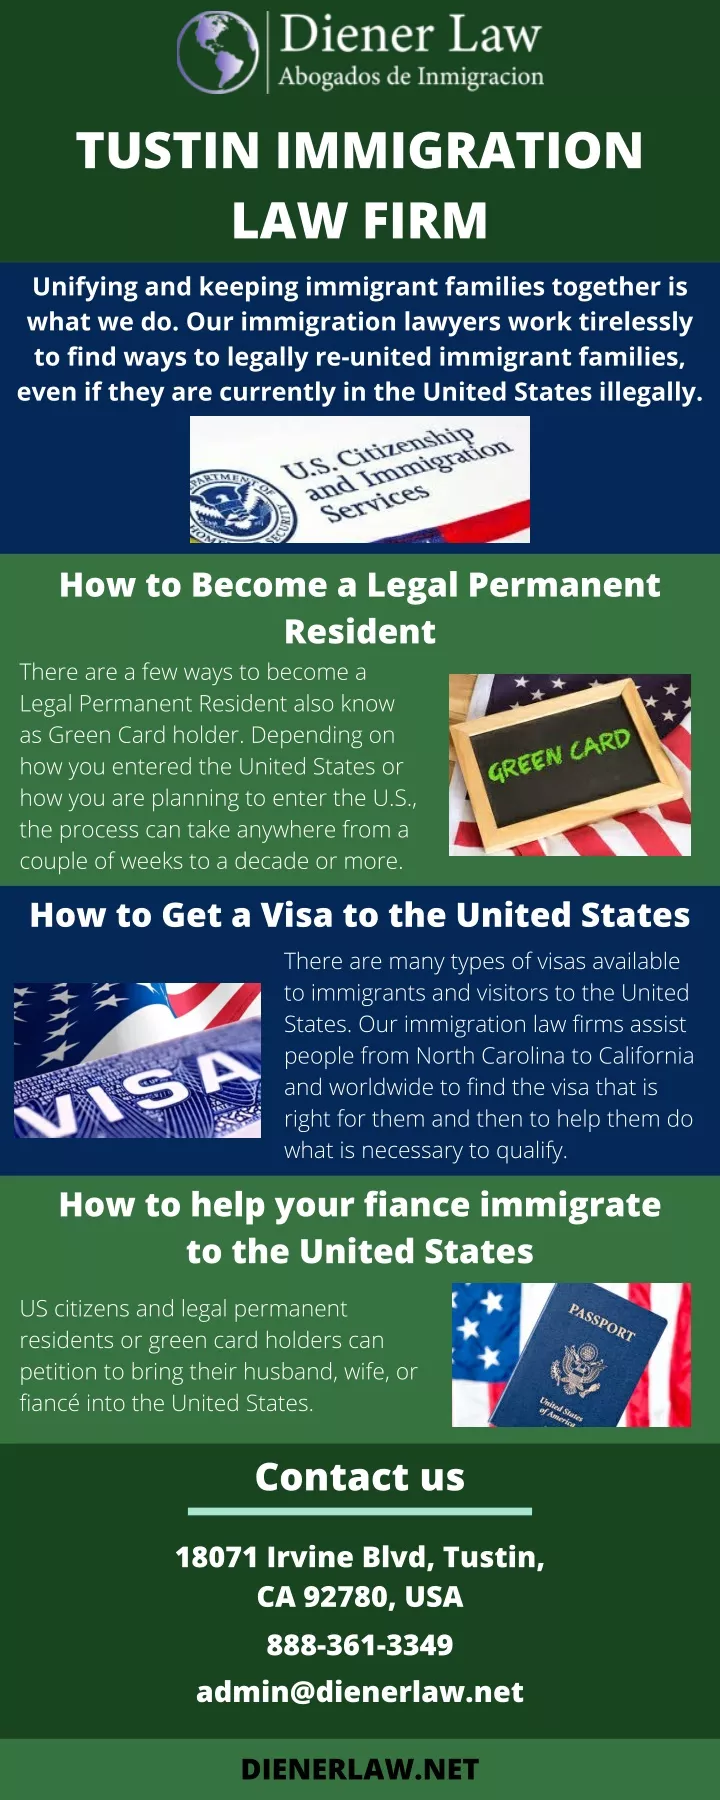 tustin immigration law firm